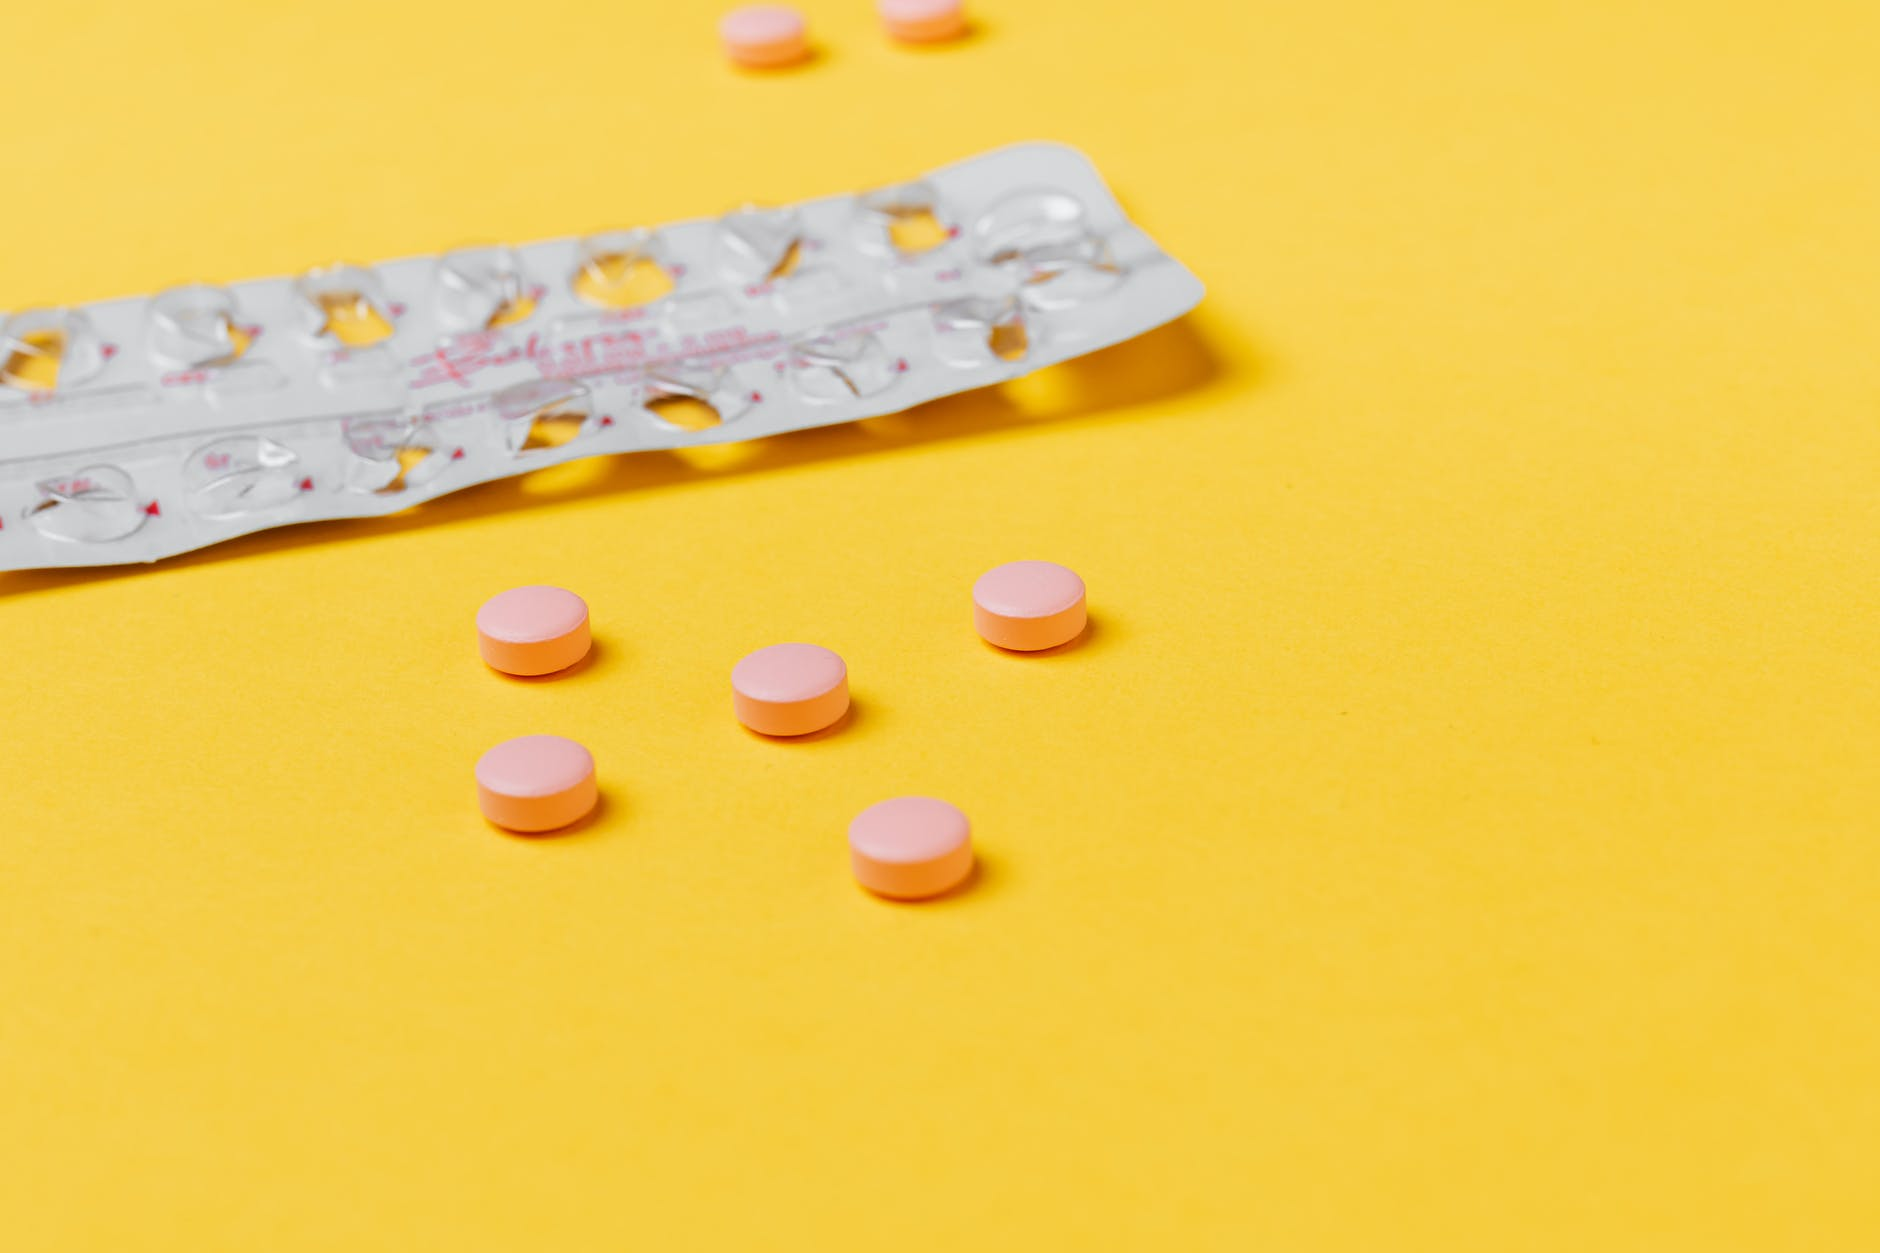 pink pills scattered on a yellow table